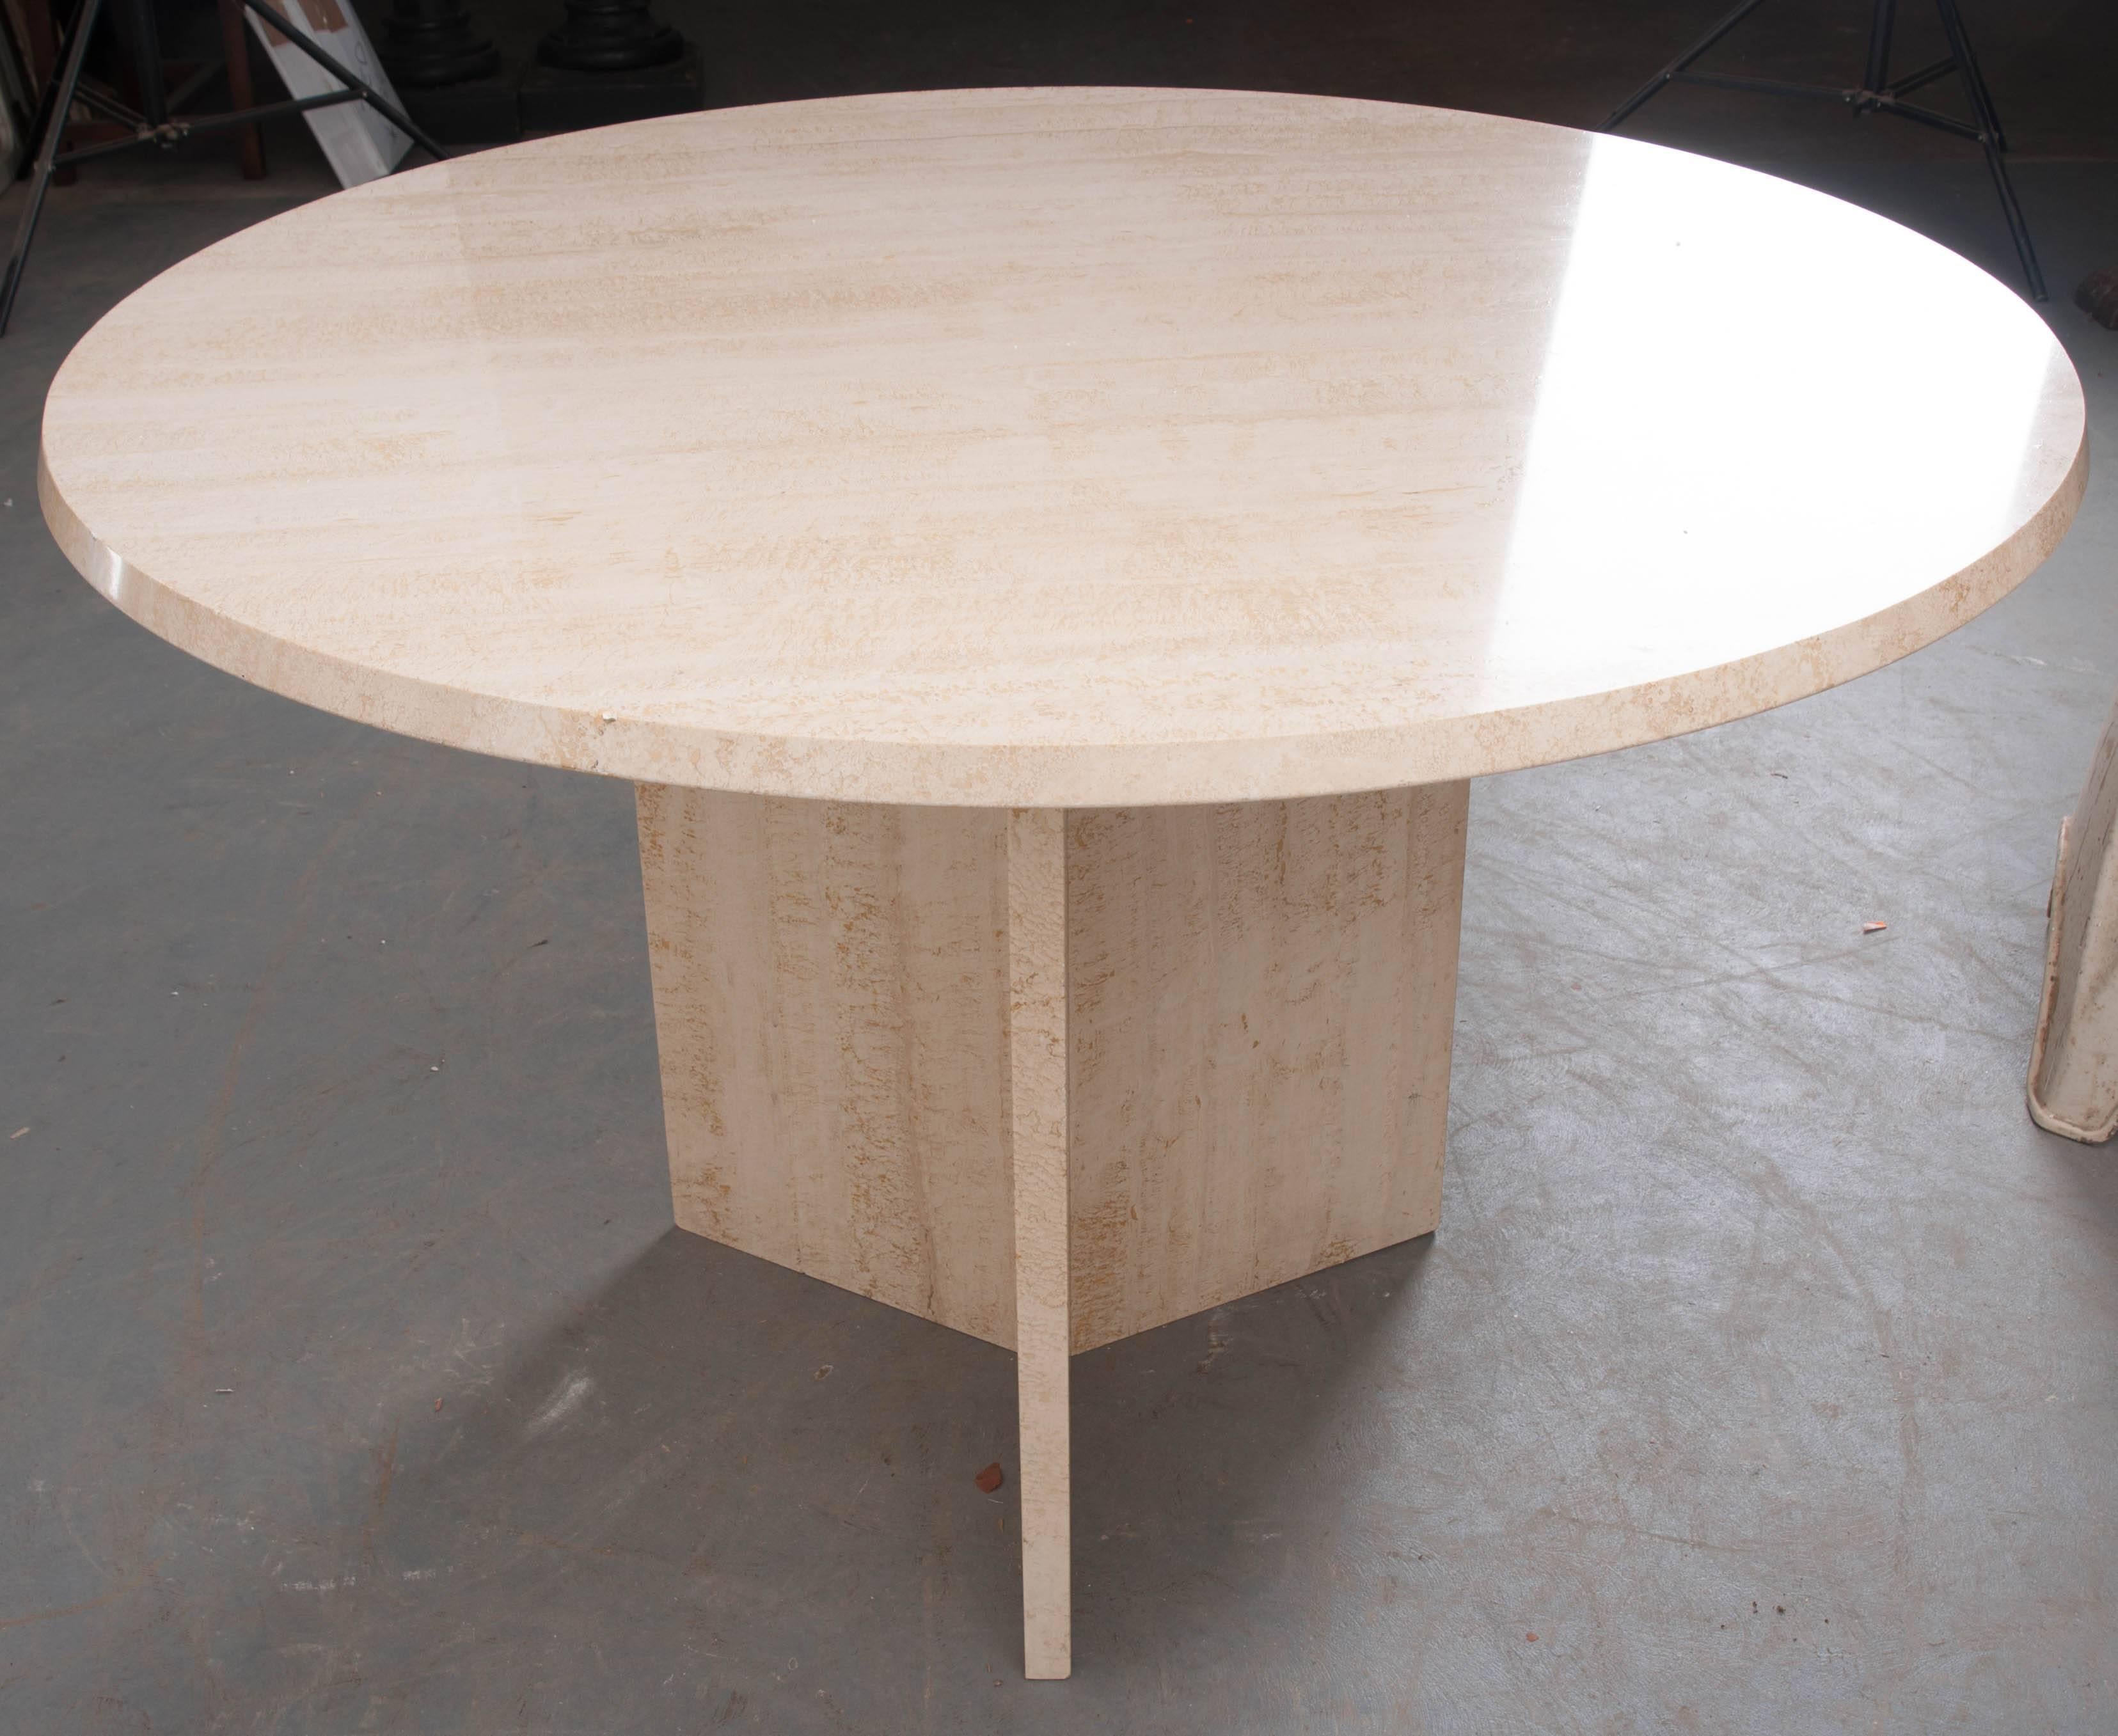 A stunning, round, stone dining table from early 20th century, France. The ivory stone is in exceptional condition and rests perfectly on its three-panel stone pedestal base. This show stopping antique is stylish and chic and sure to impress your